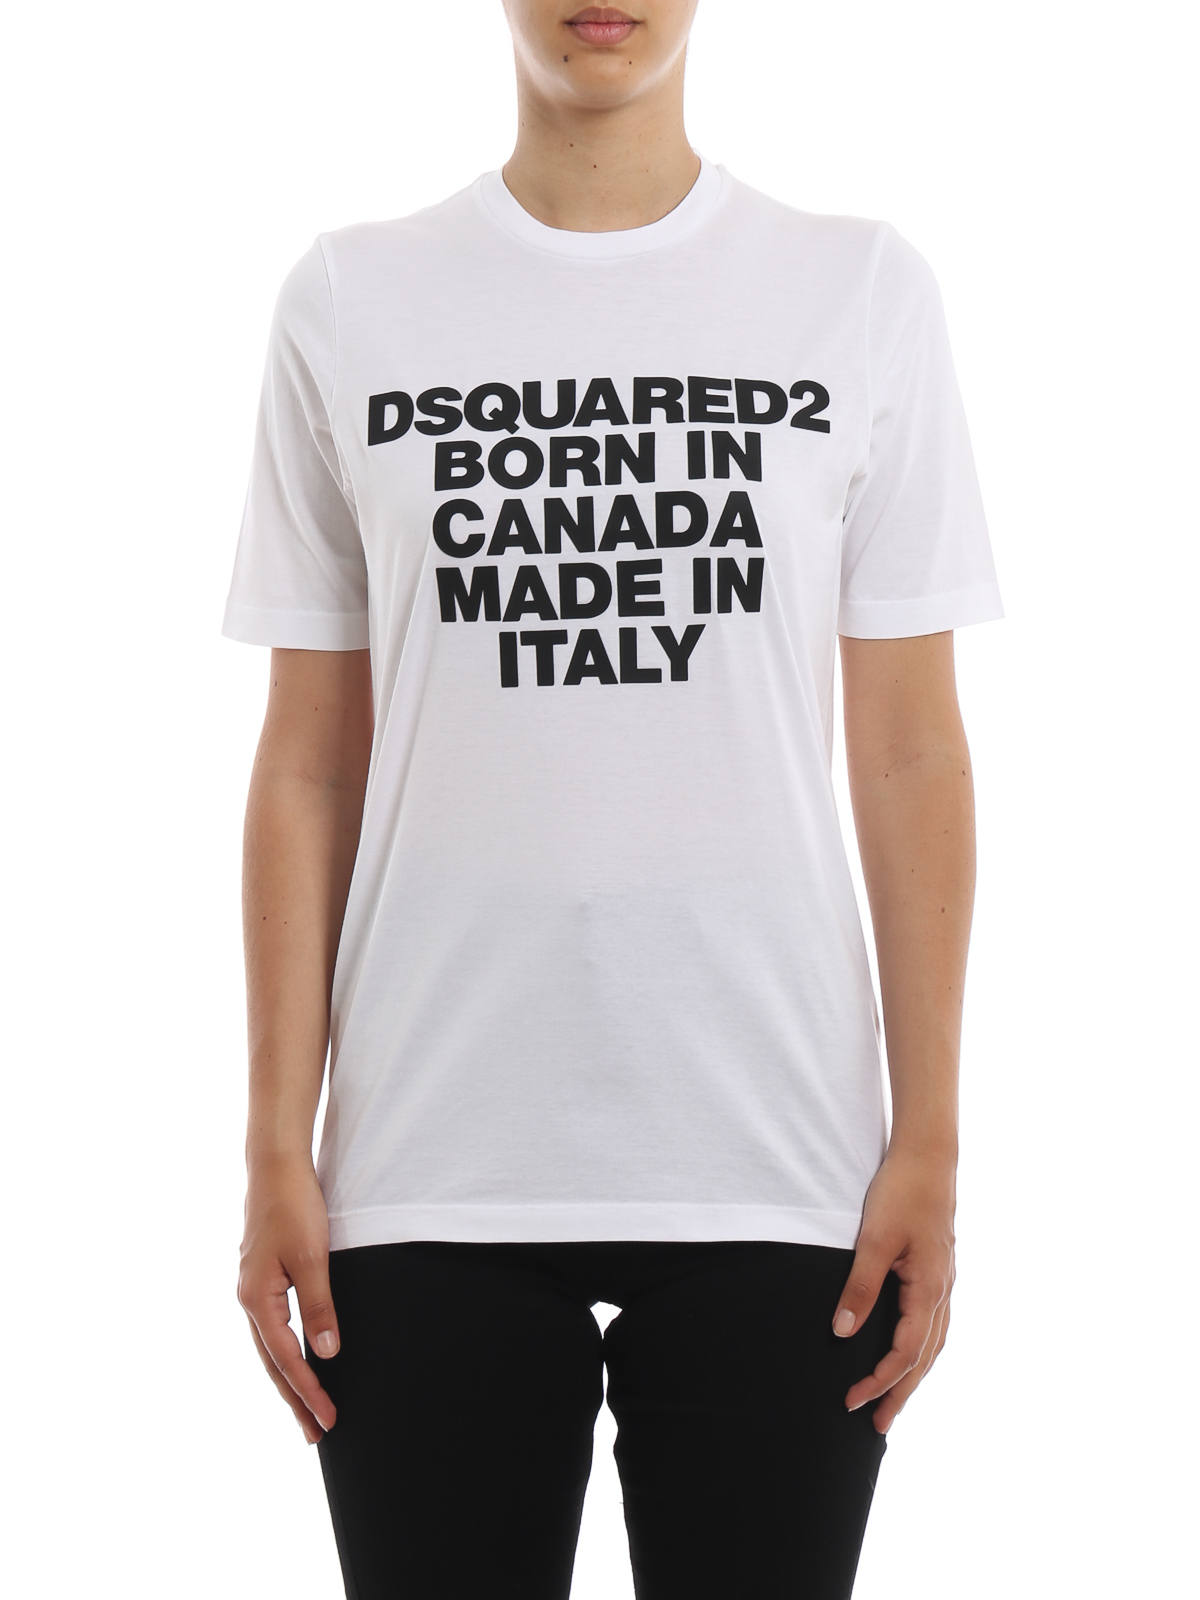 dsquared t shirt born in canada made in italy